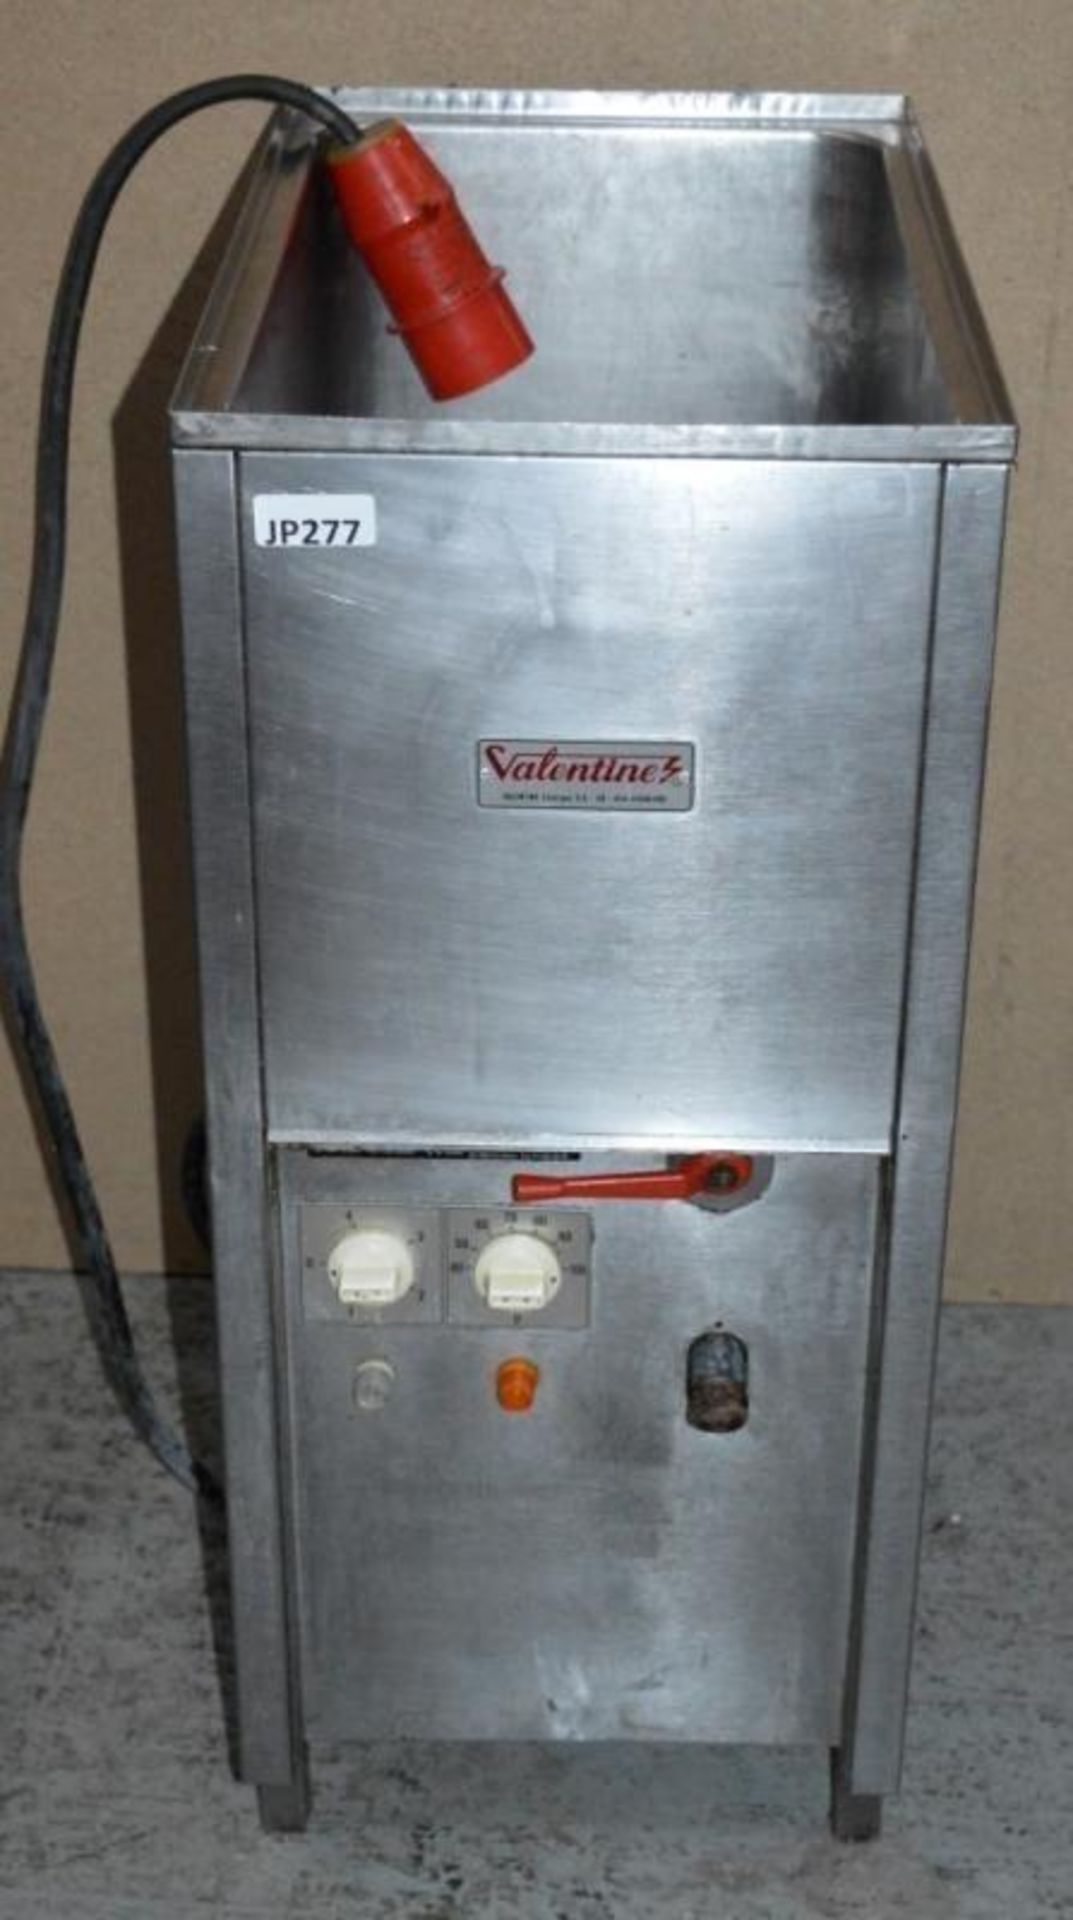 1 x Valentine VMC 1 Stainless Steel Freestanding Pasta Boiler - H83 x W35 x D65cms - 3 Phase - CL232 - Image 3 of 3